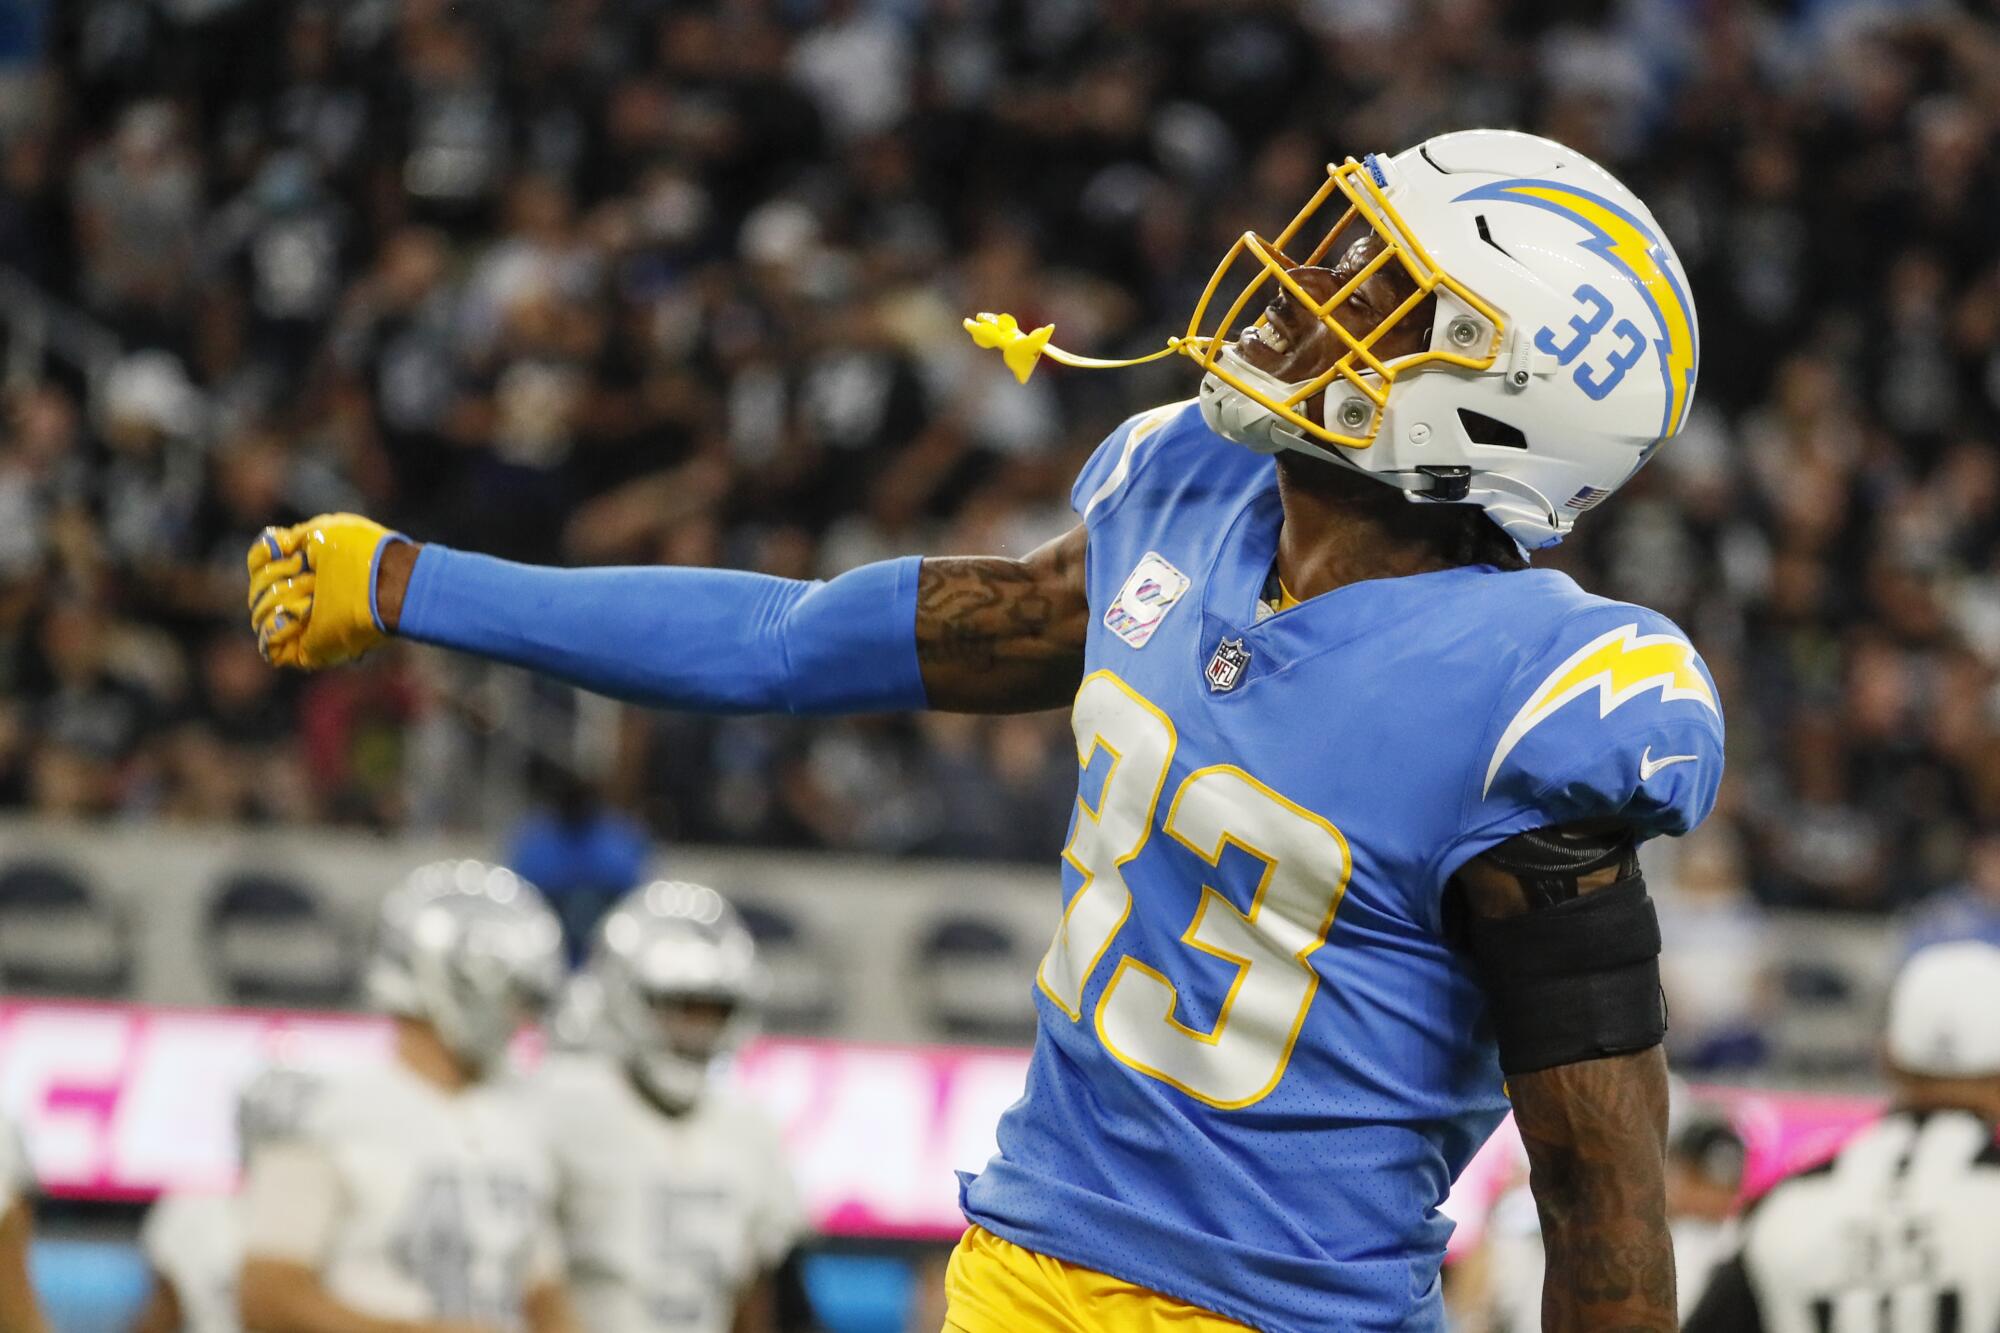 Chargers free safety Derwin James celebrates after stopping the Raiders on third down.